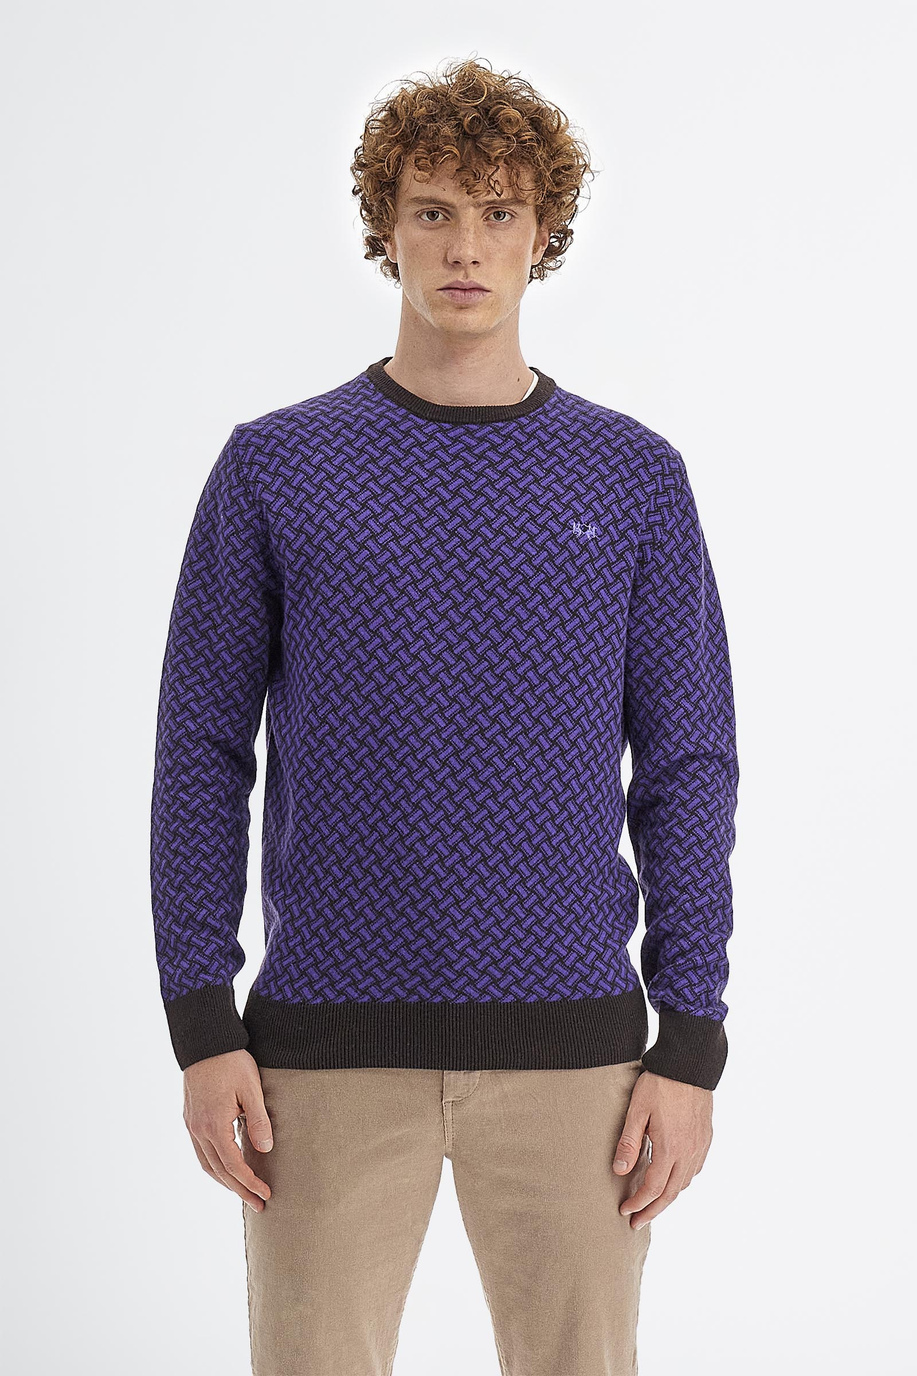 Men’s crew neck sweater Argentina with long sleeves in regular fit cashmere merino wool blend - Preview  | La Martina - Official Online Shop